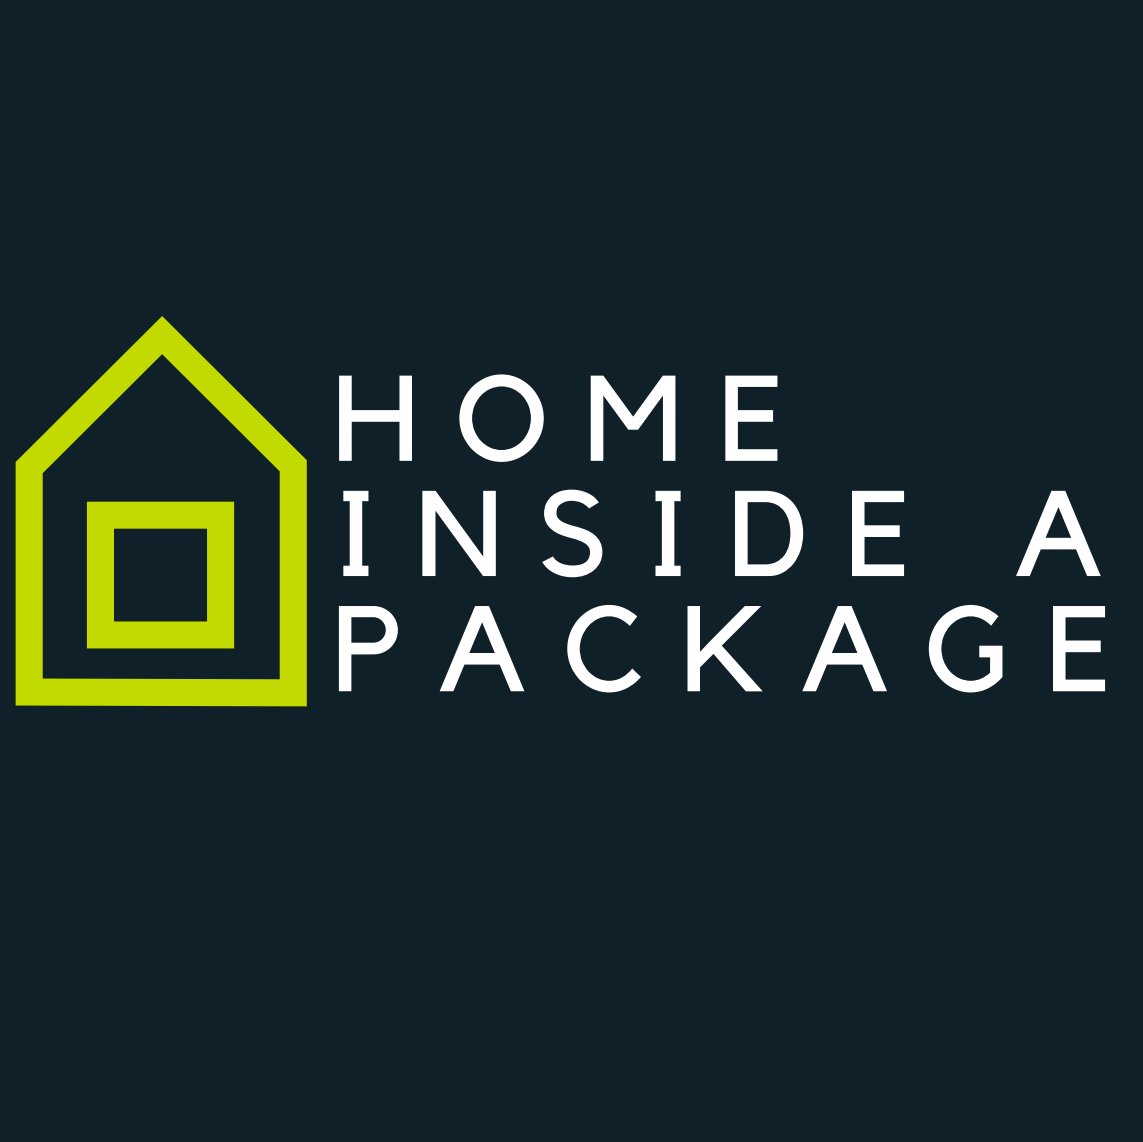 HOME INSIDE A PACKAGE(HIP)👨‍👩‍👧‍👦 Packages cater to GENDER💡 Home away from Home, bundled in a Package 📦💝